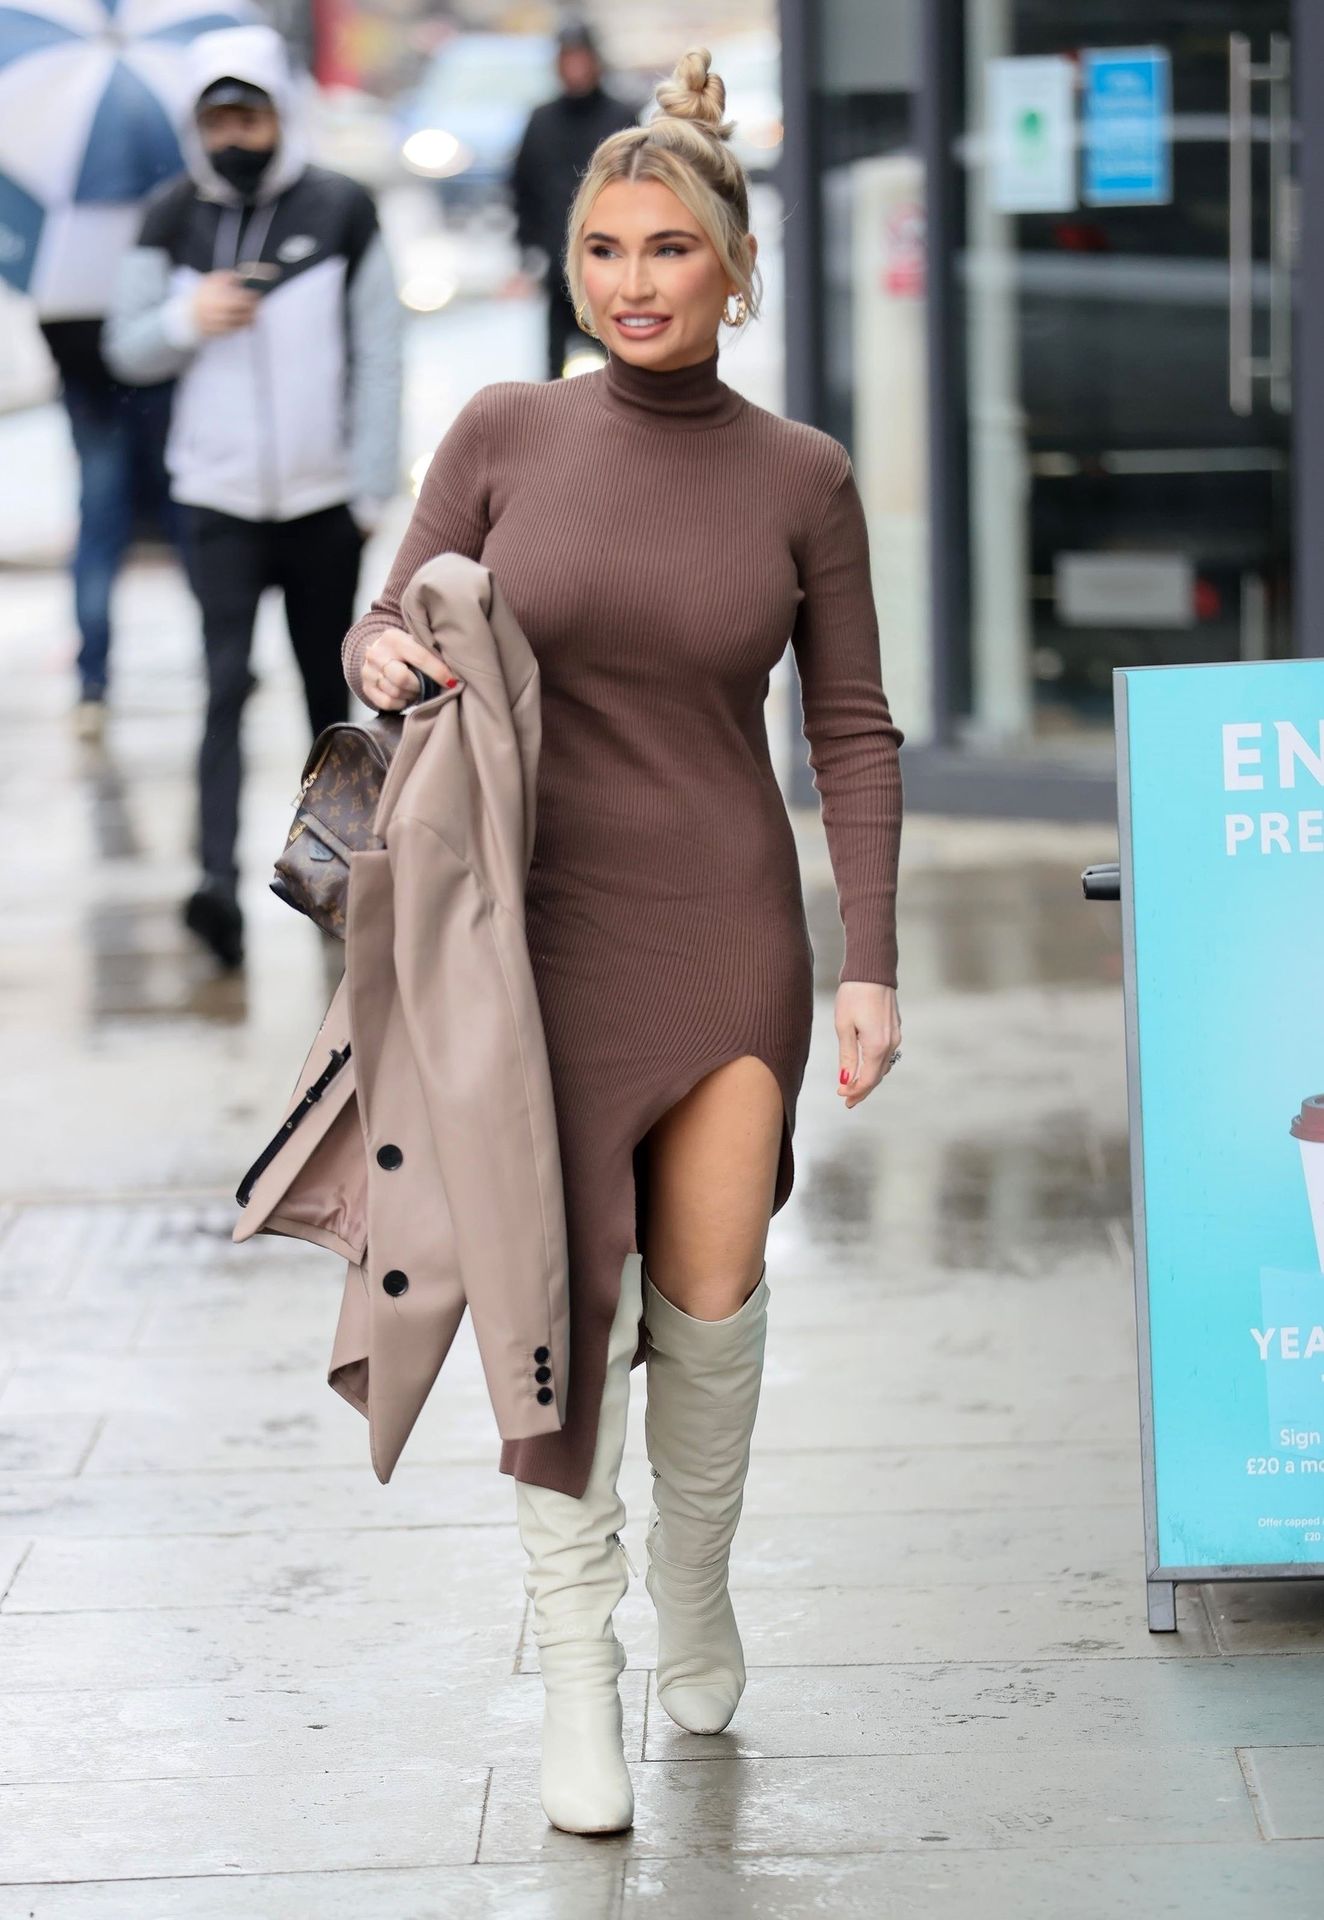 Billie Faiers Looks Chic and Stylish in London (11 Photos)